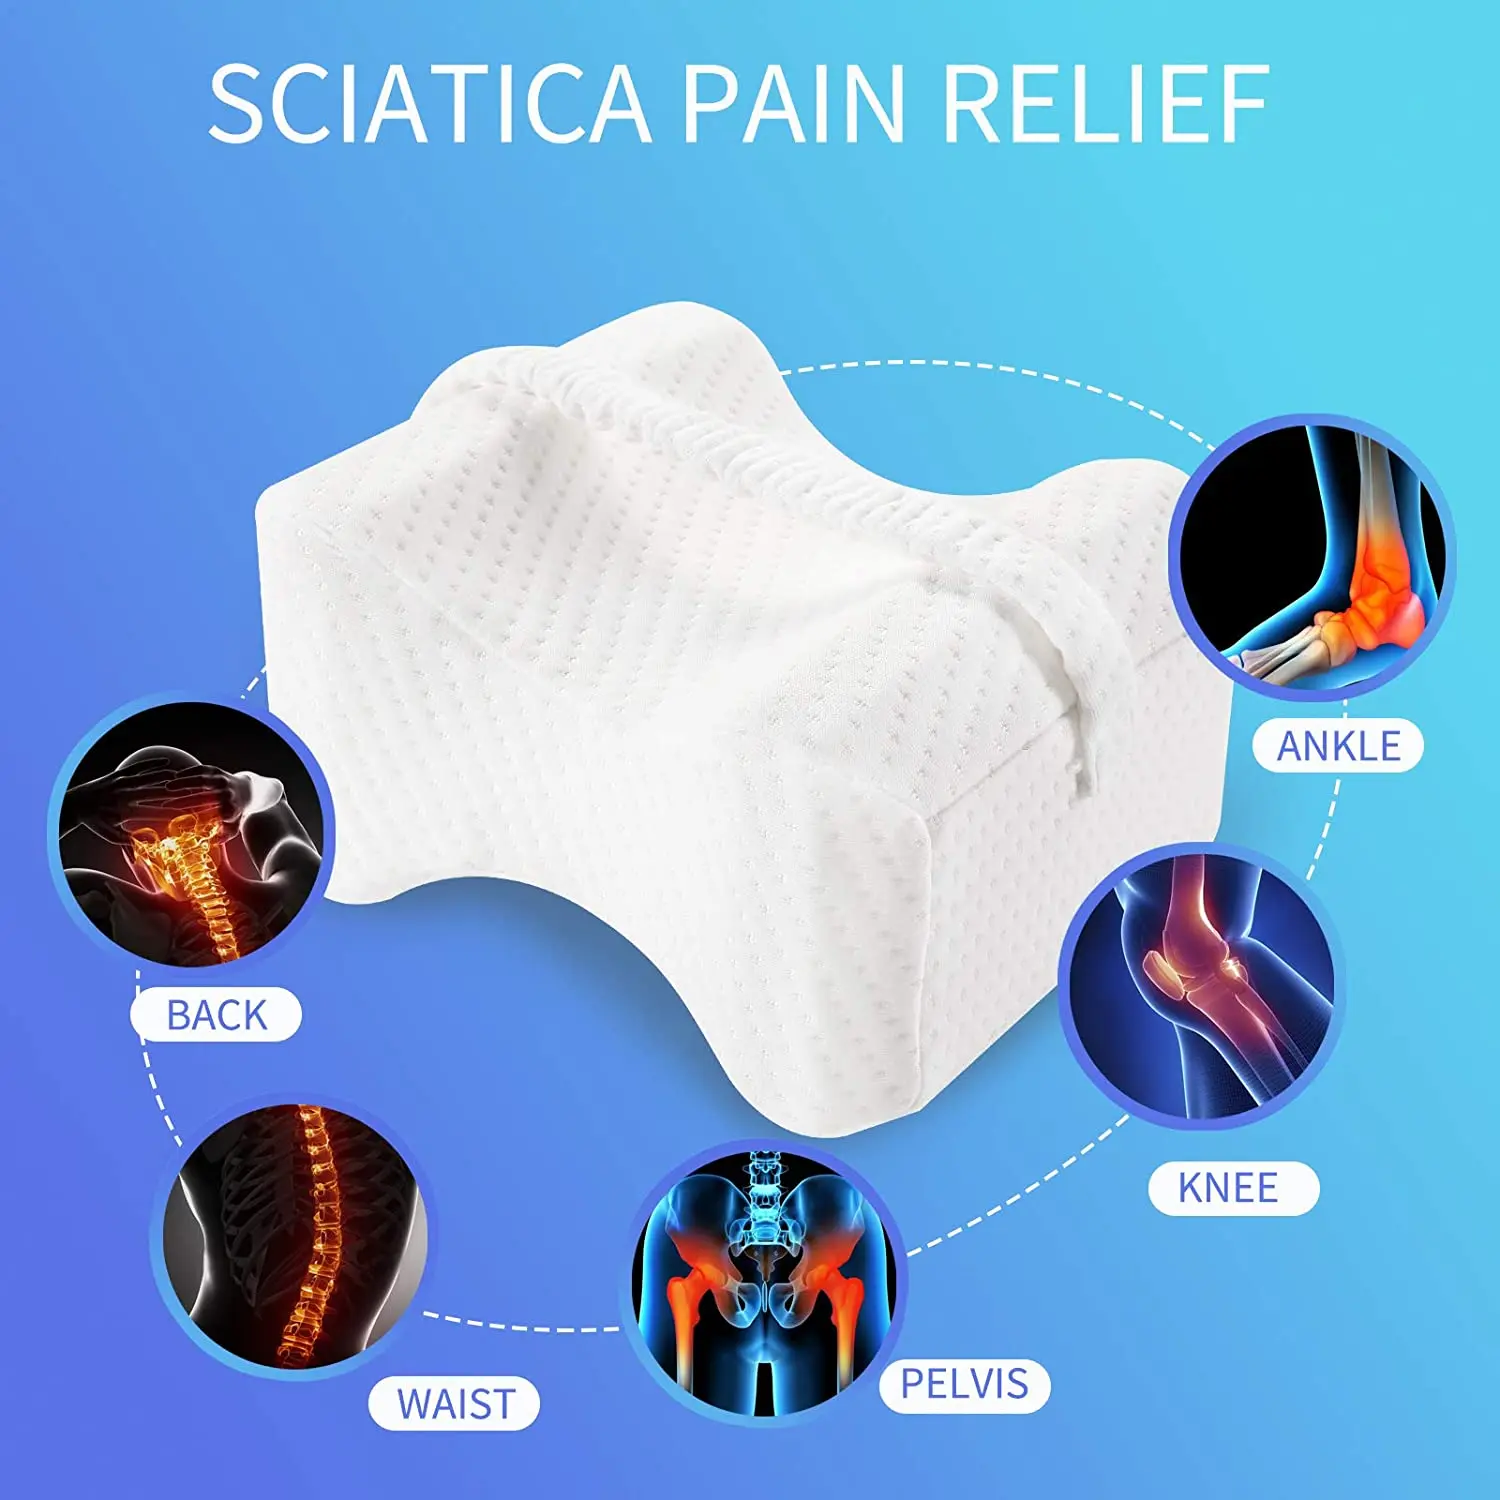 Buy Wholesale China Orthopedic Knee Pillow For Sciatica Relief, Back Pain,  Leg Pain, Pregnancy, Hip And Joint Pain & Leg Pillows For Sleeping at USD  6.5